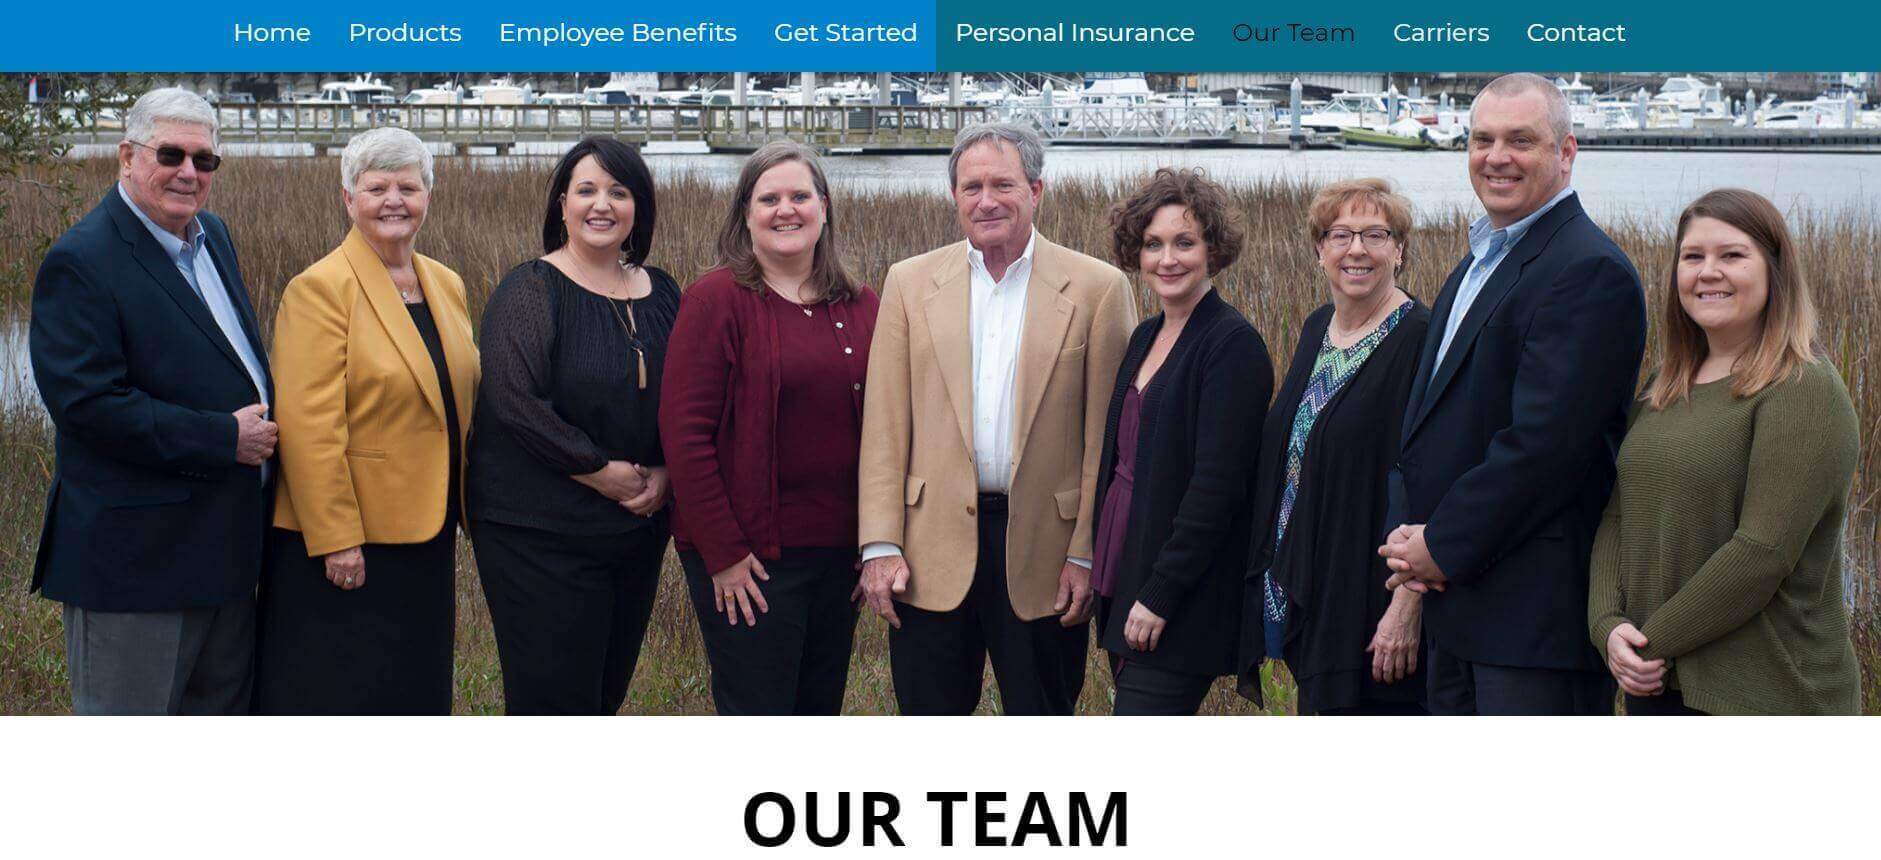 benefit concepts employee benefit company web design in charleston